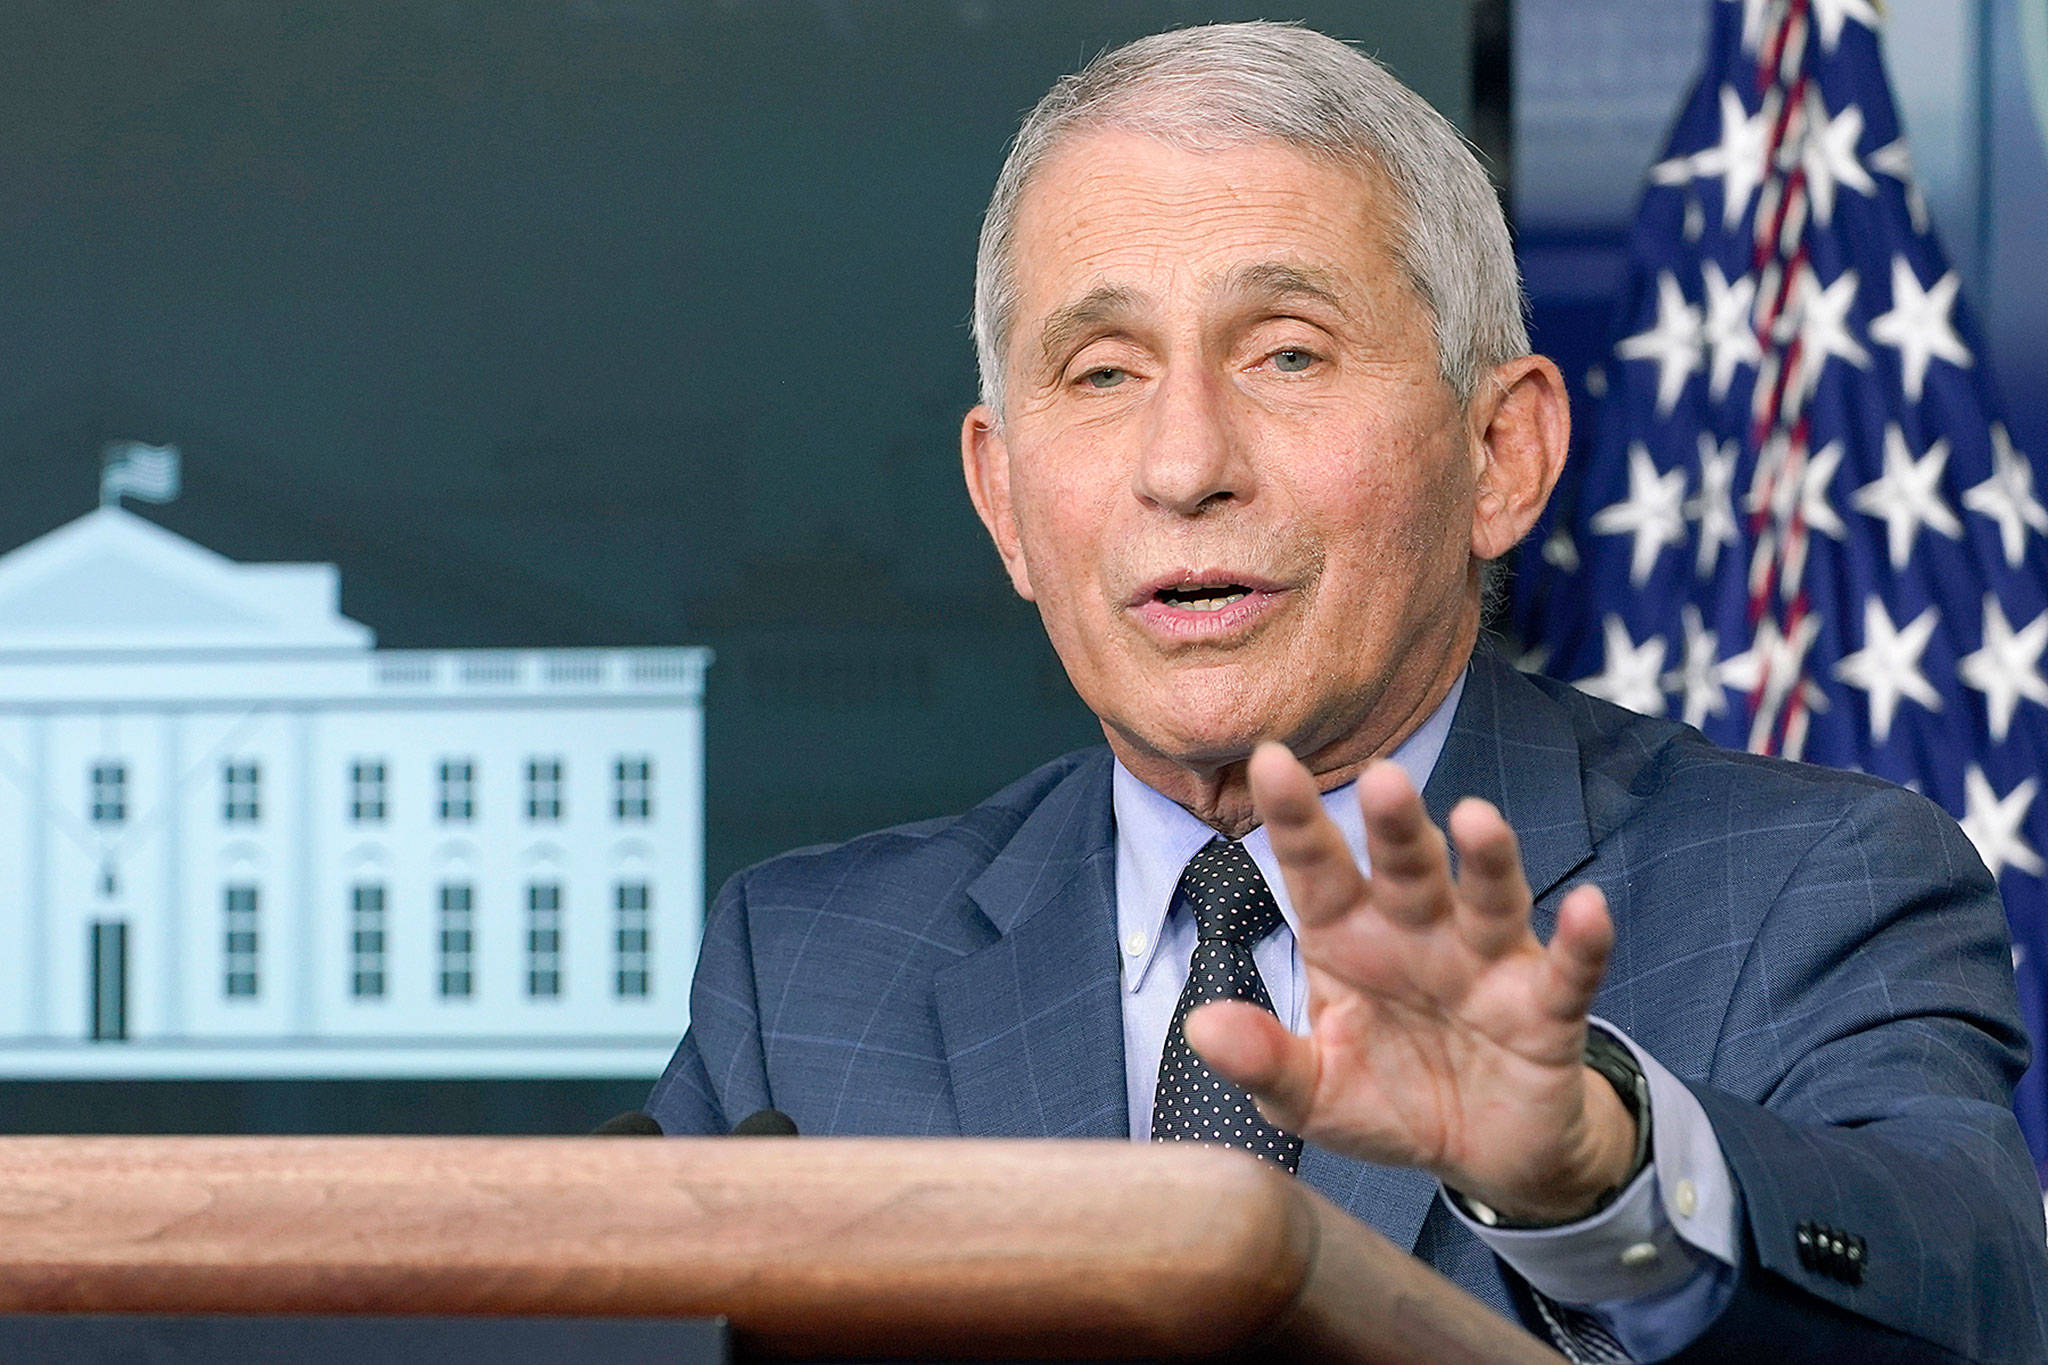 Dr. Anthony Fauci, director of the National Institute for Allergy and Infectious Diseases, speaks Nov. 19 during a news conference with the coronavirus task force at the White House in Washington, D.C. (AP Photo/Susan Walsh)